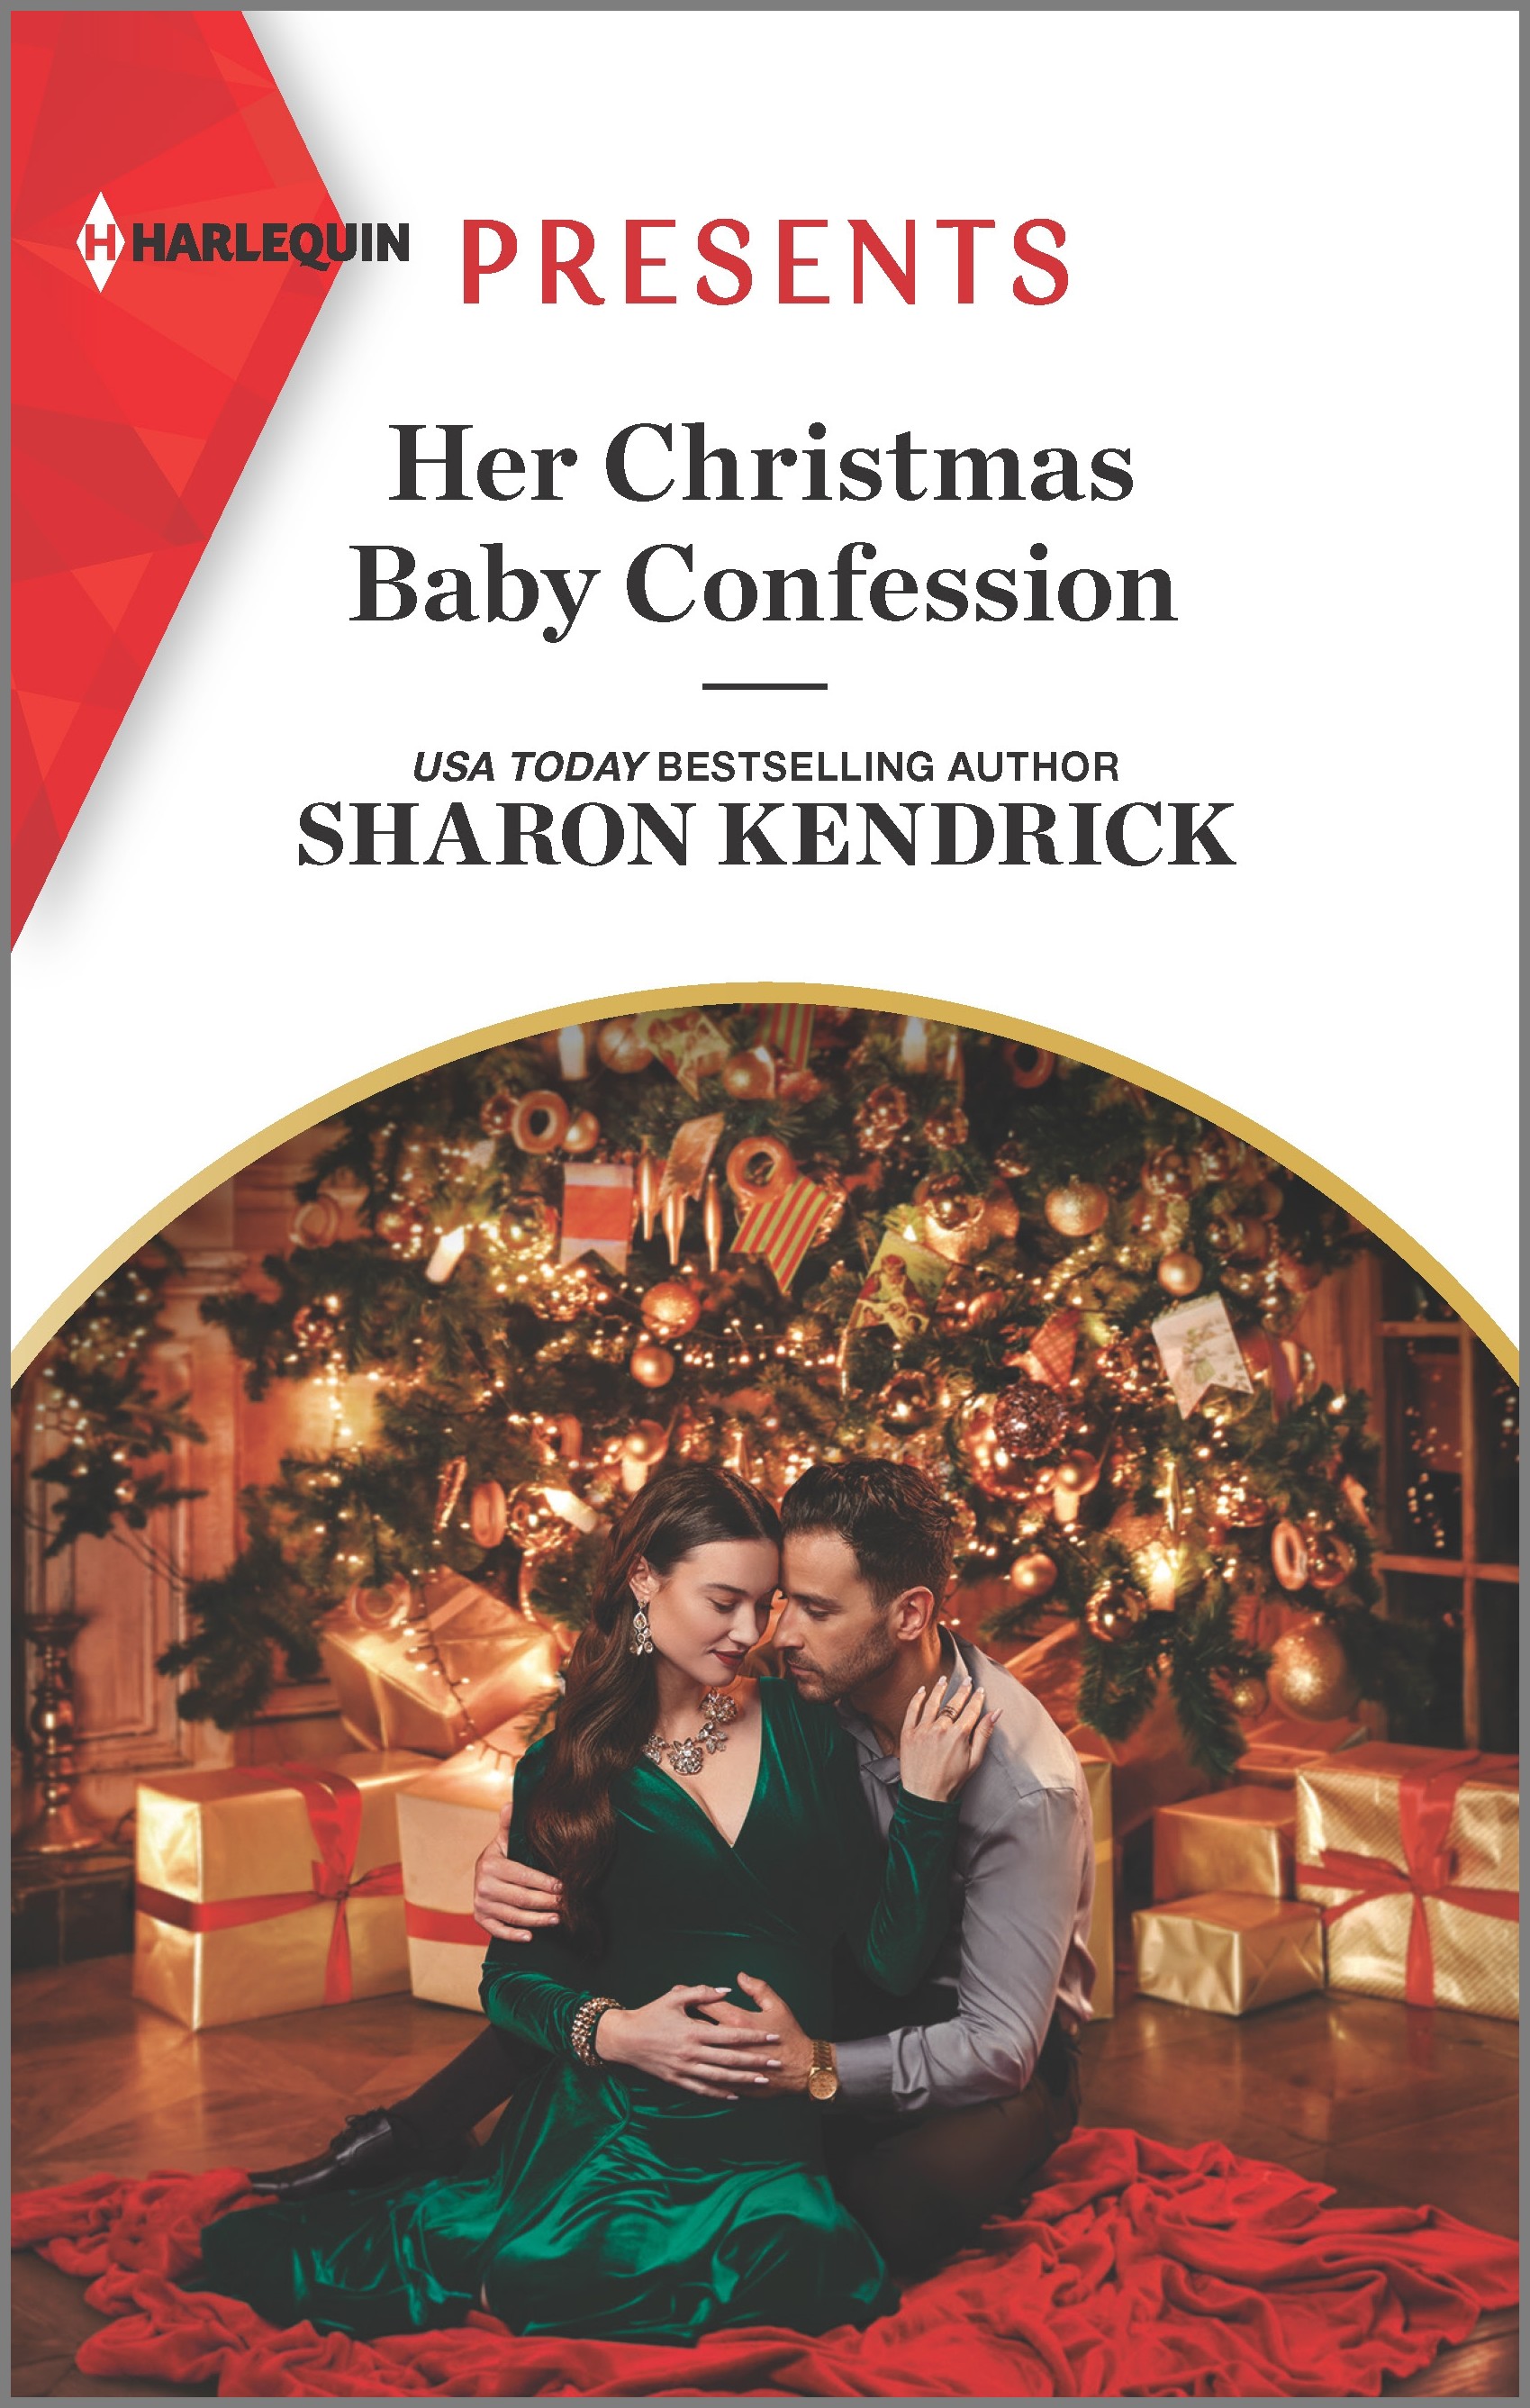 HER CHRISTMAS BABY CONFESSION by Sharon Kendrick